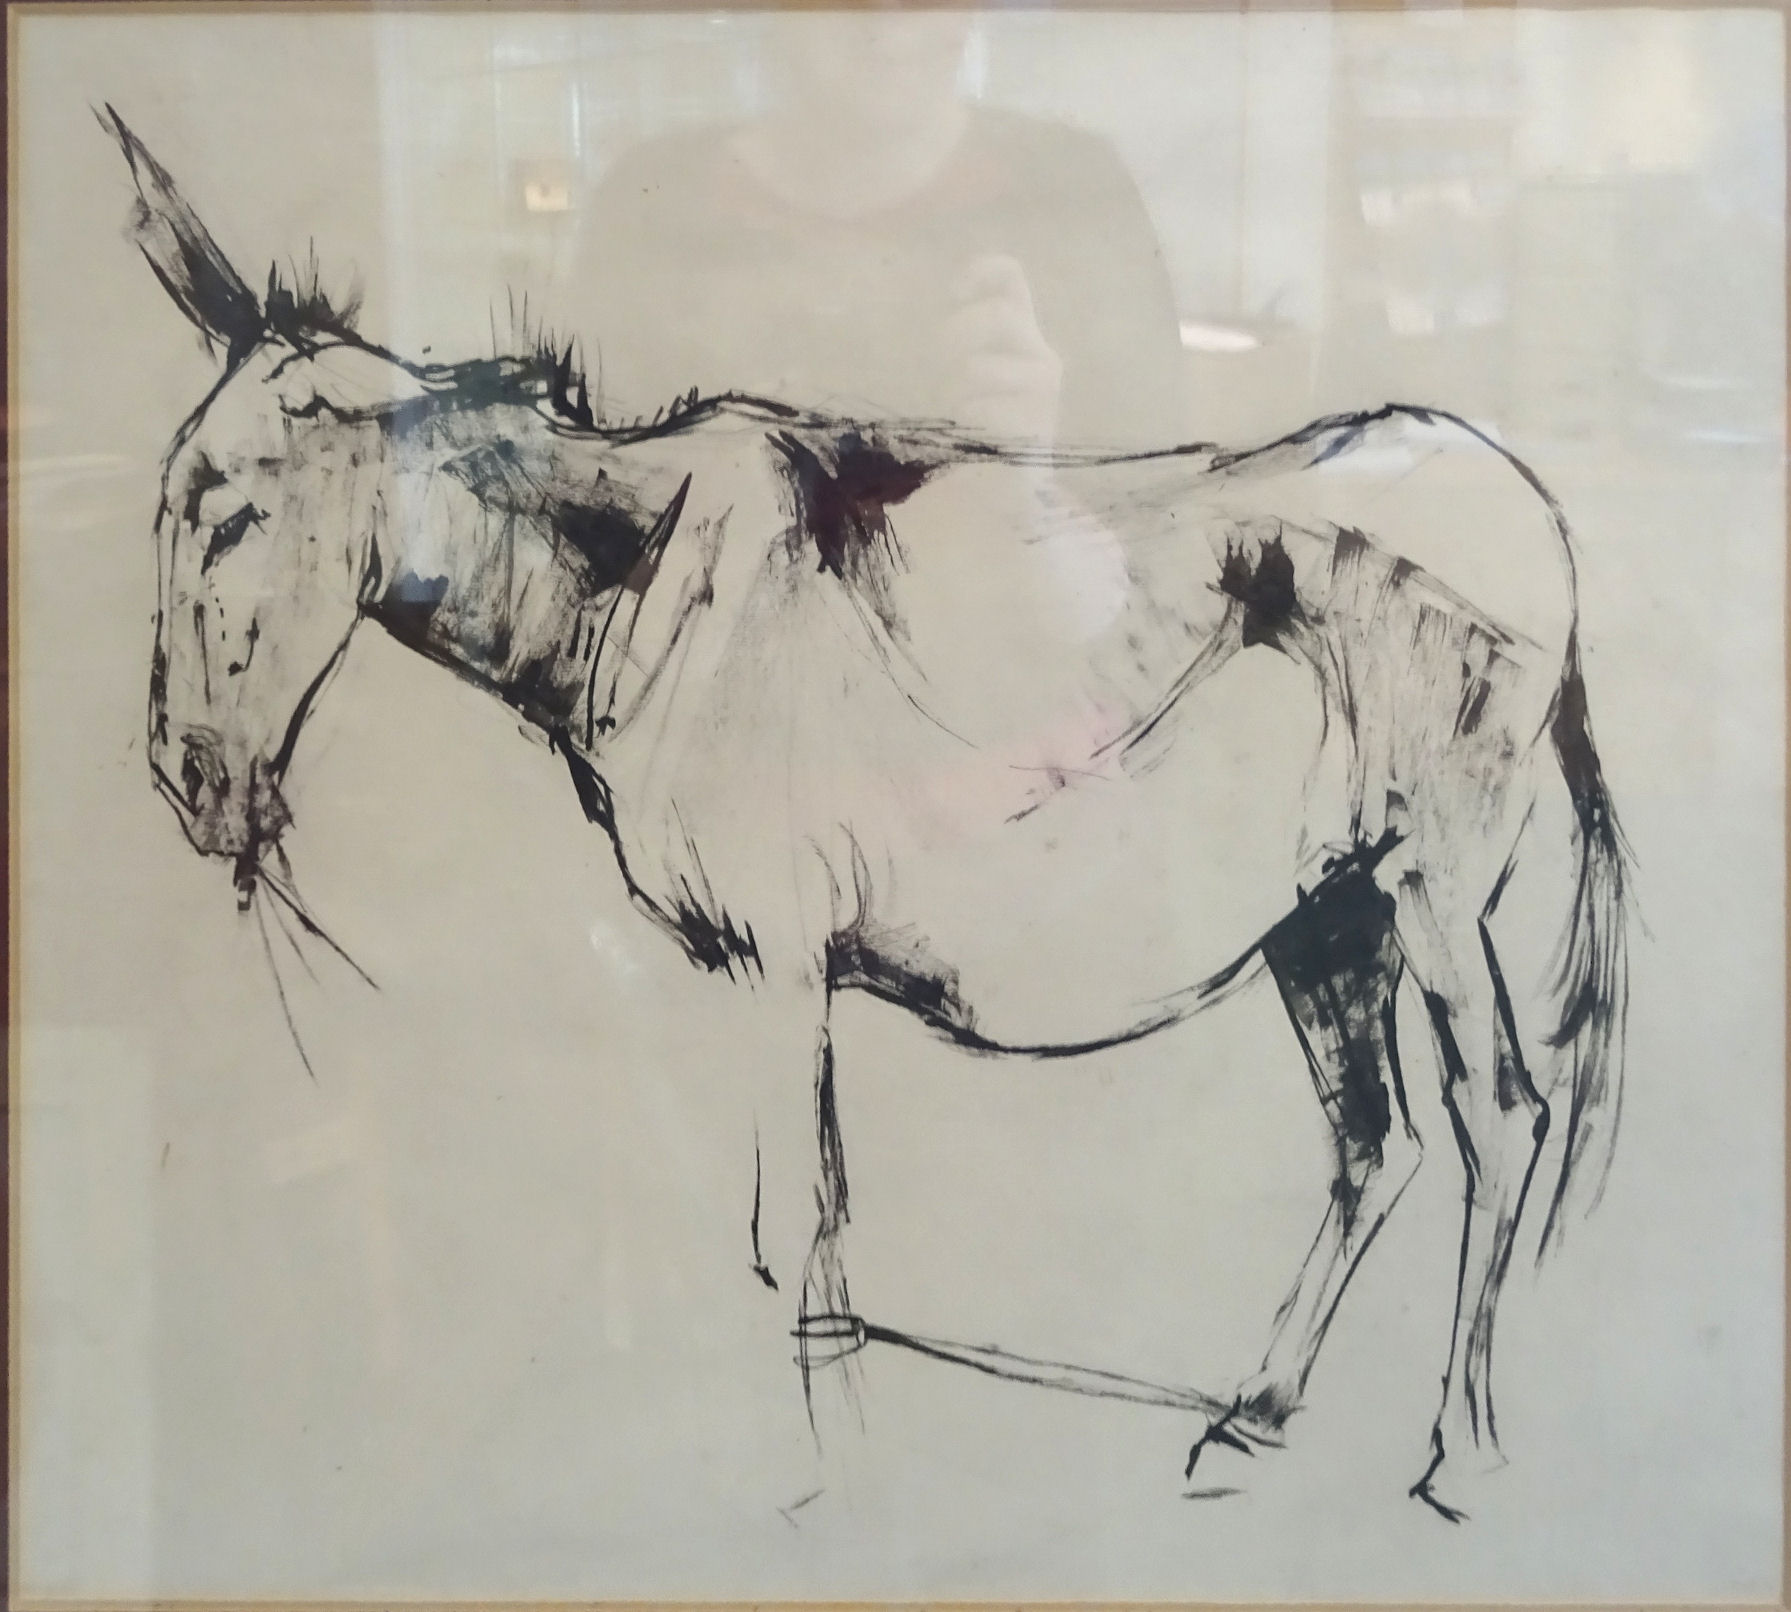 ANGELA DOUGLAS CONNER; 'Donkey' a Pen & Ink Study. 14" (36cms) x 18 1/2" (47cms) with Tryon